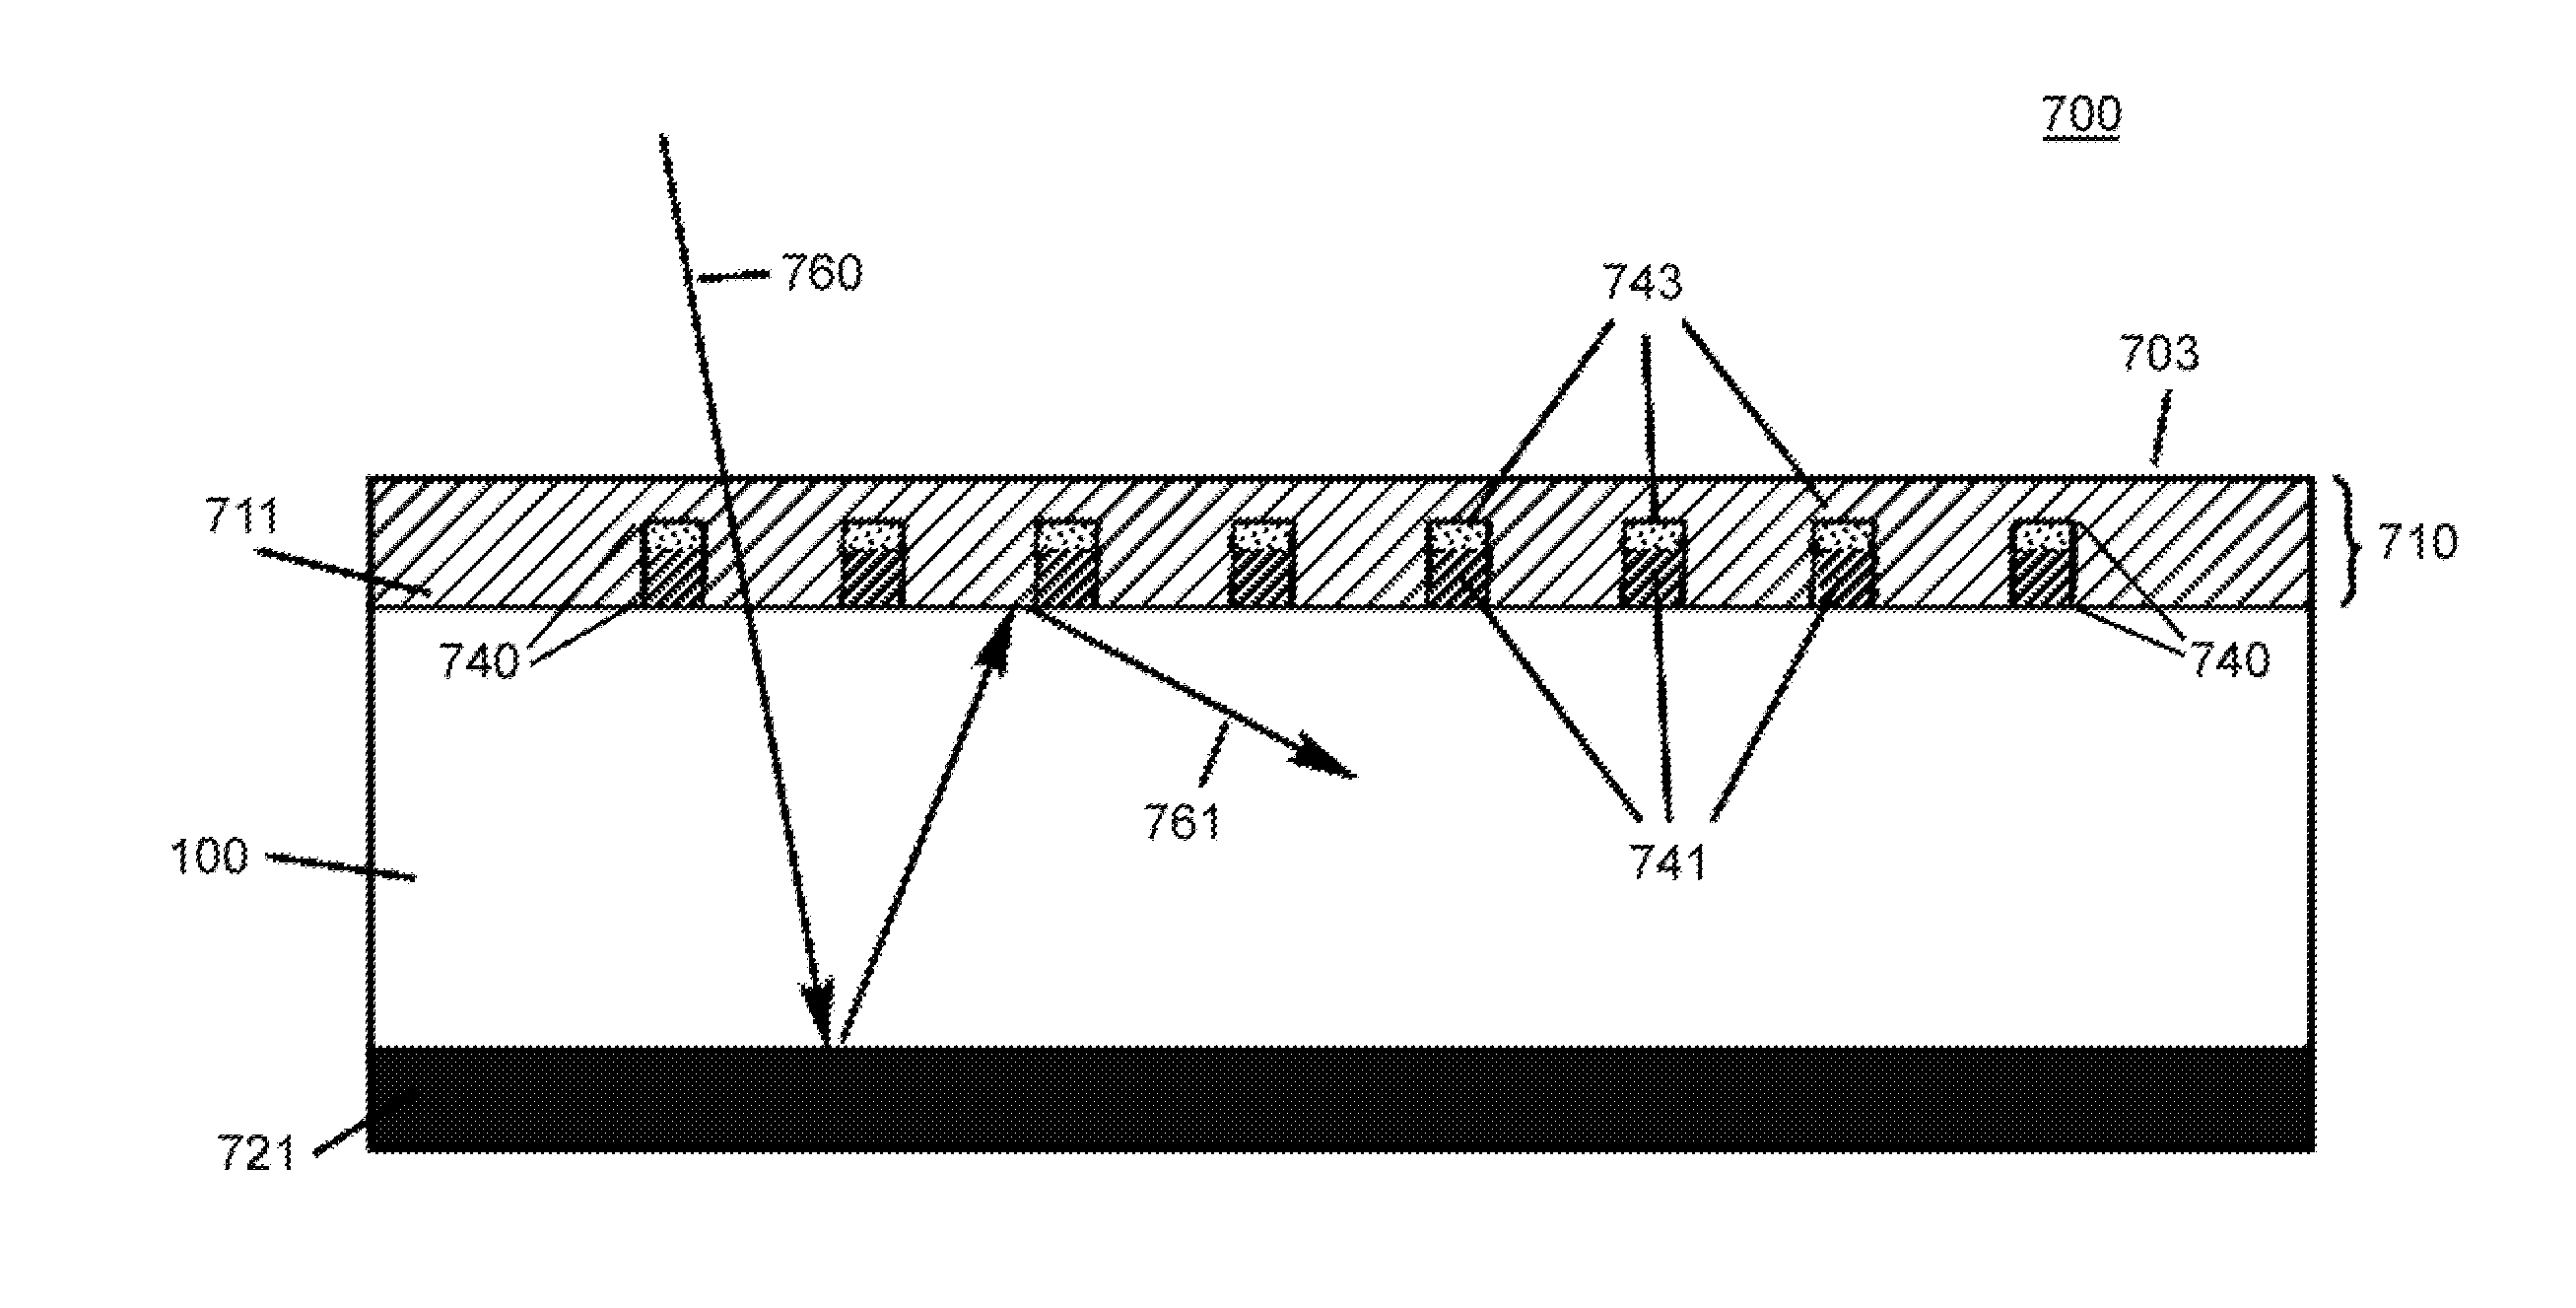 Planar Plasmonic Device for Light Reflection, Diffusion and Guiding